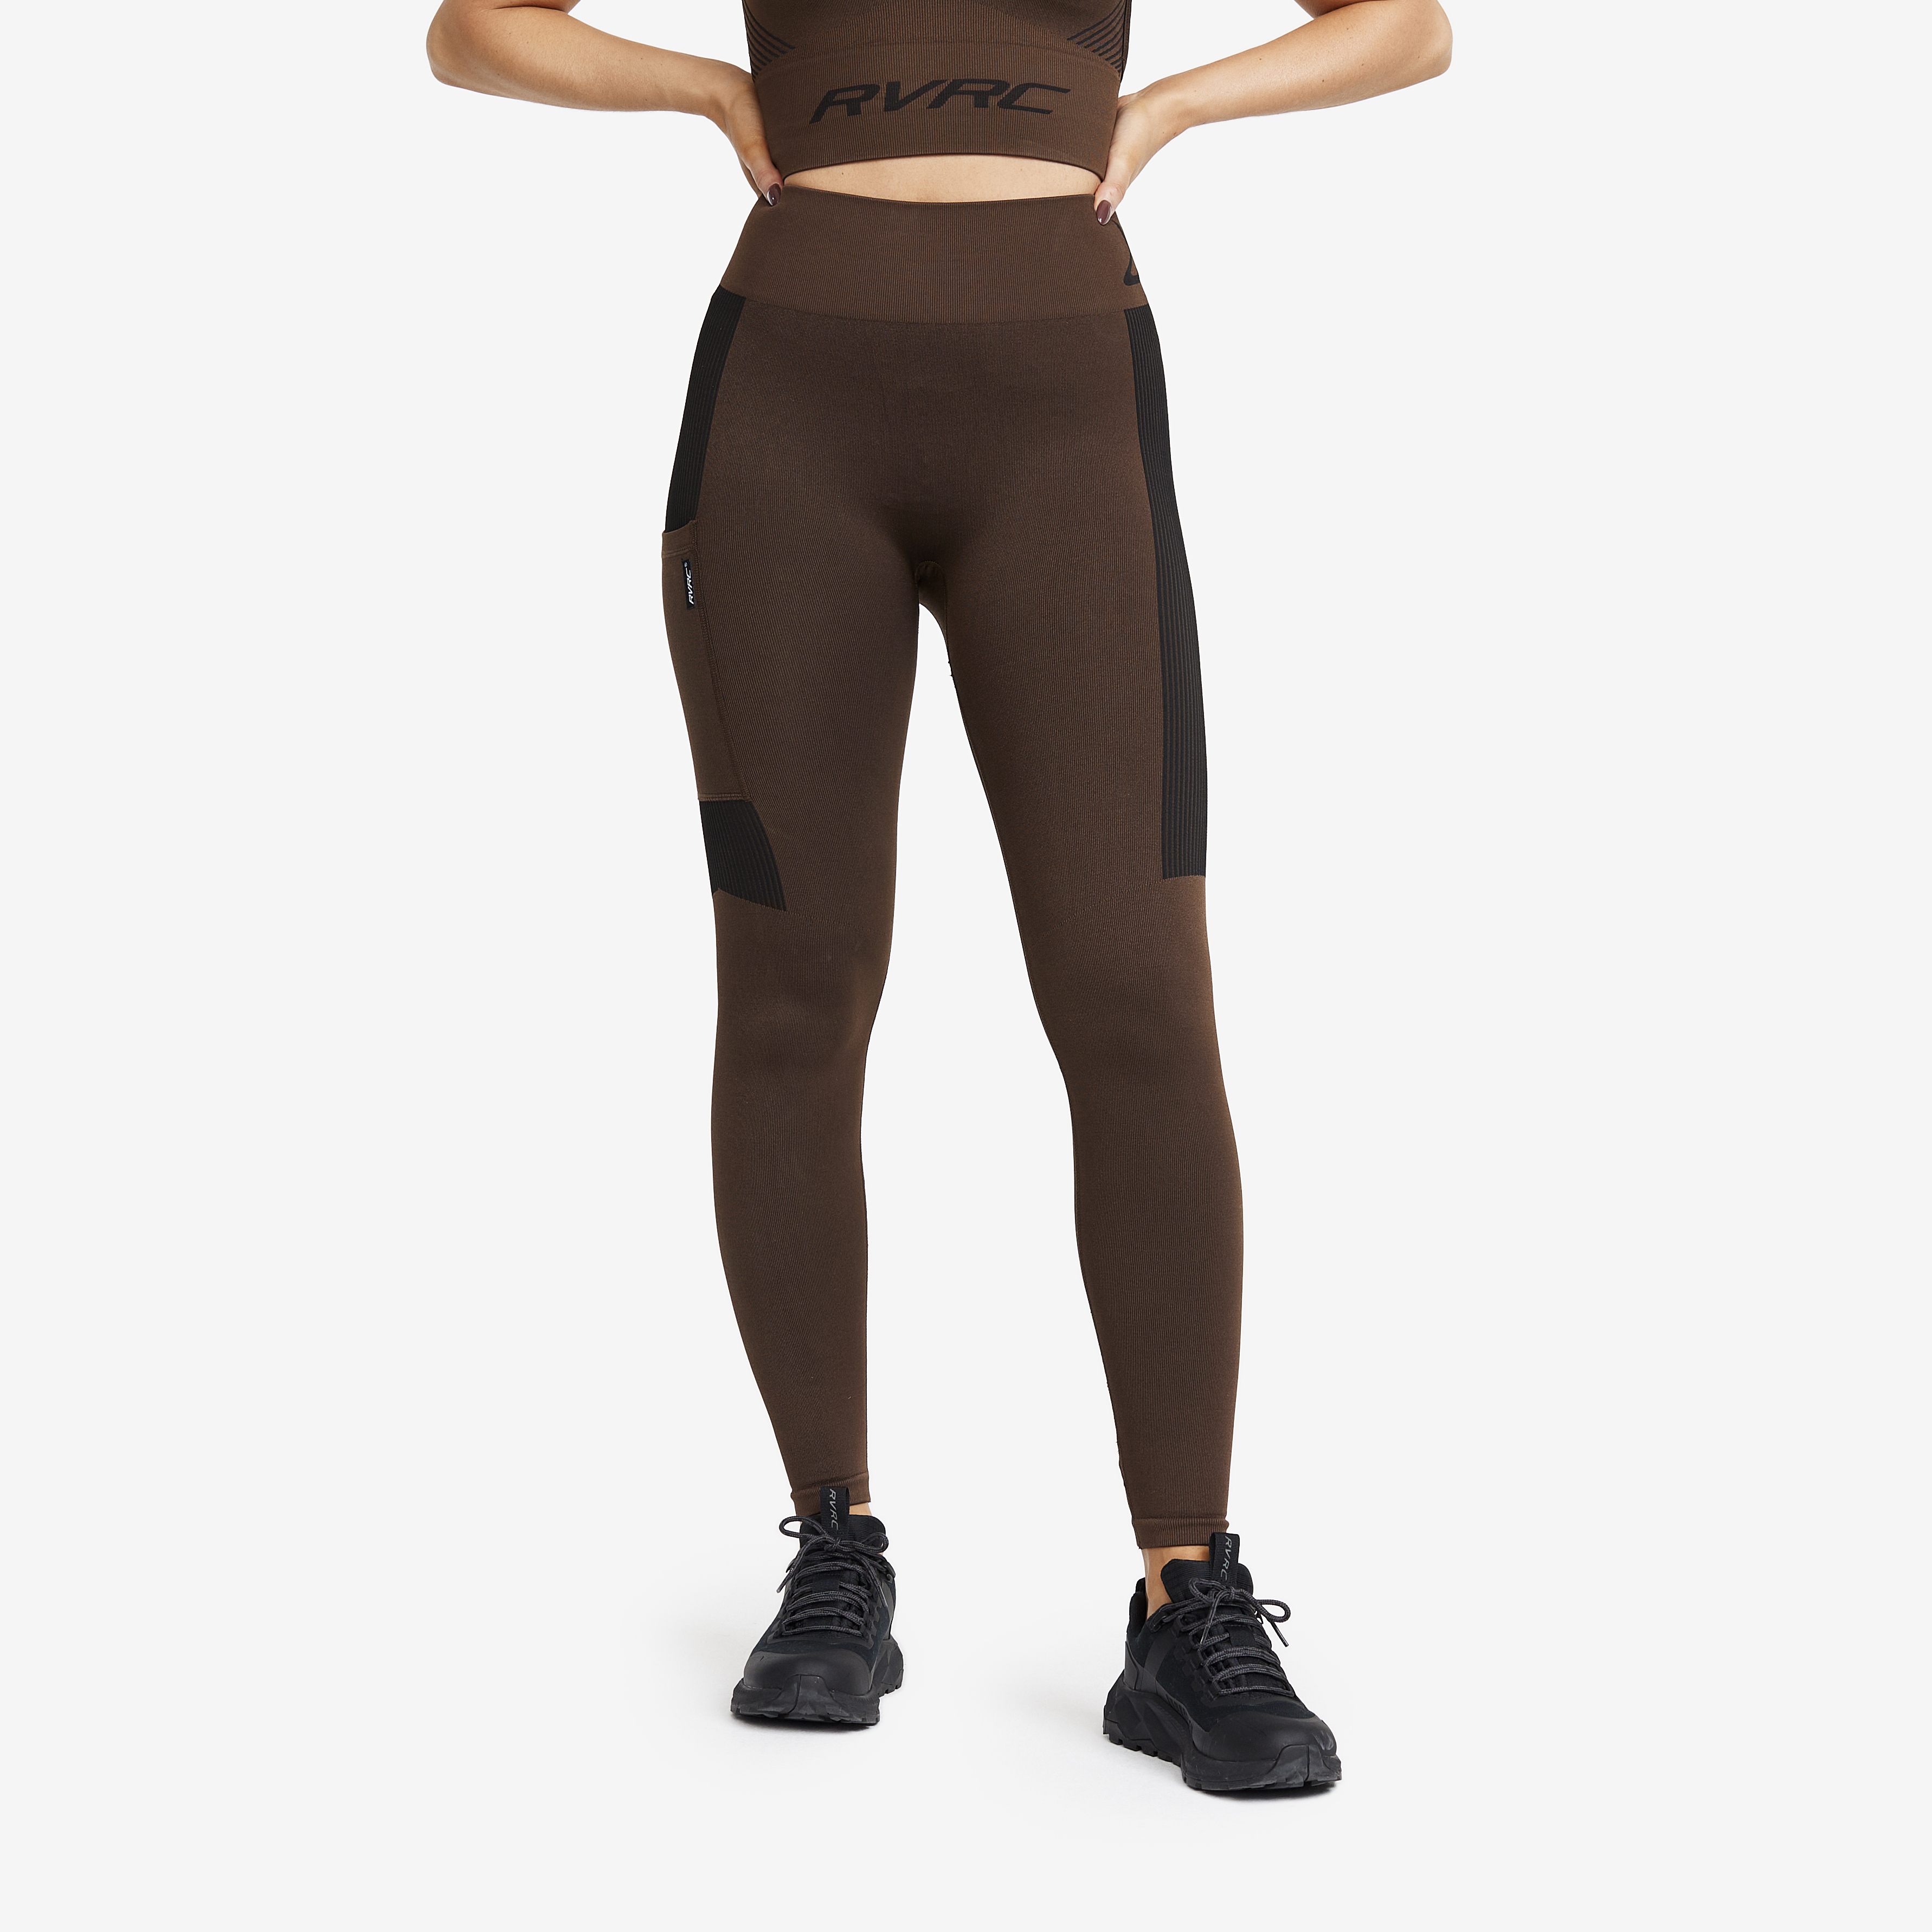 Descent Seamless Tights – Dam – Chocolate Chip Storlek:S-M – Outdoor Tights